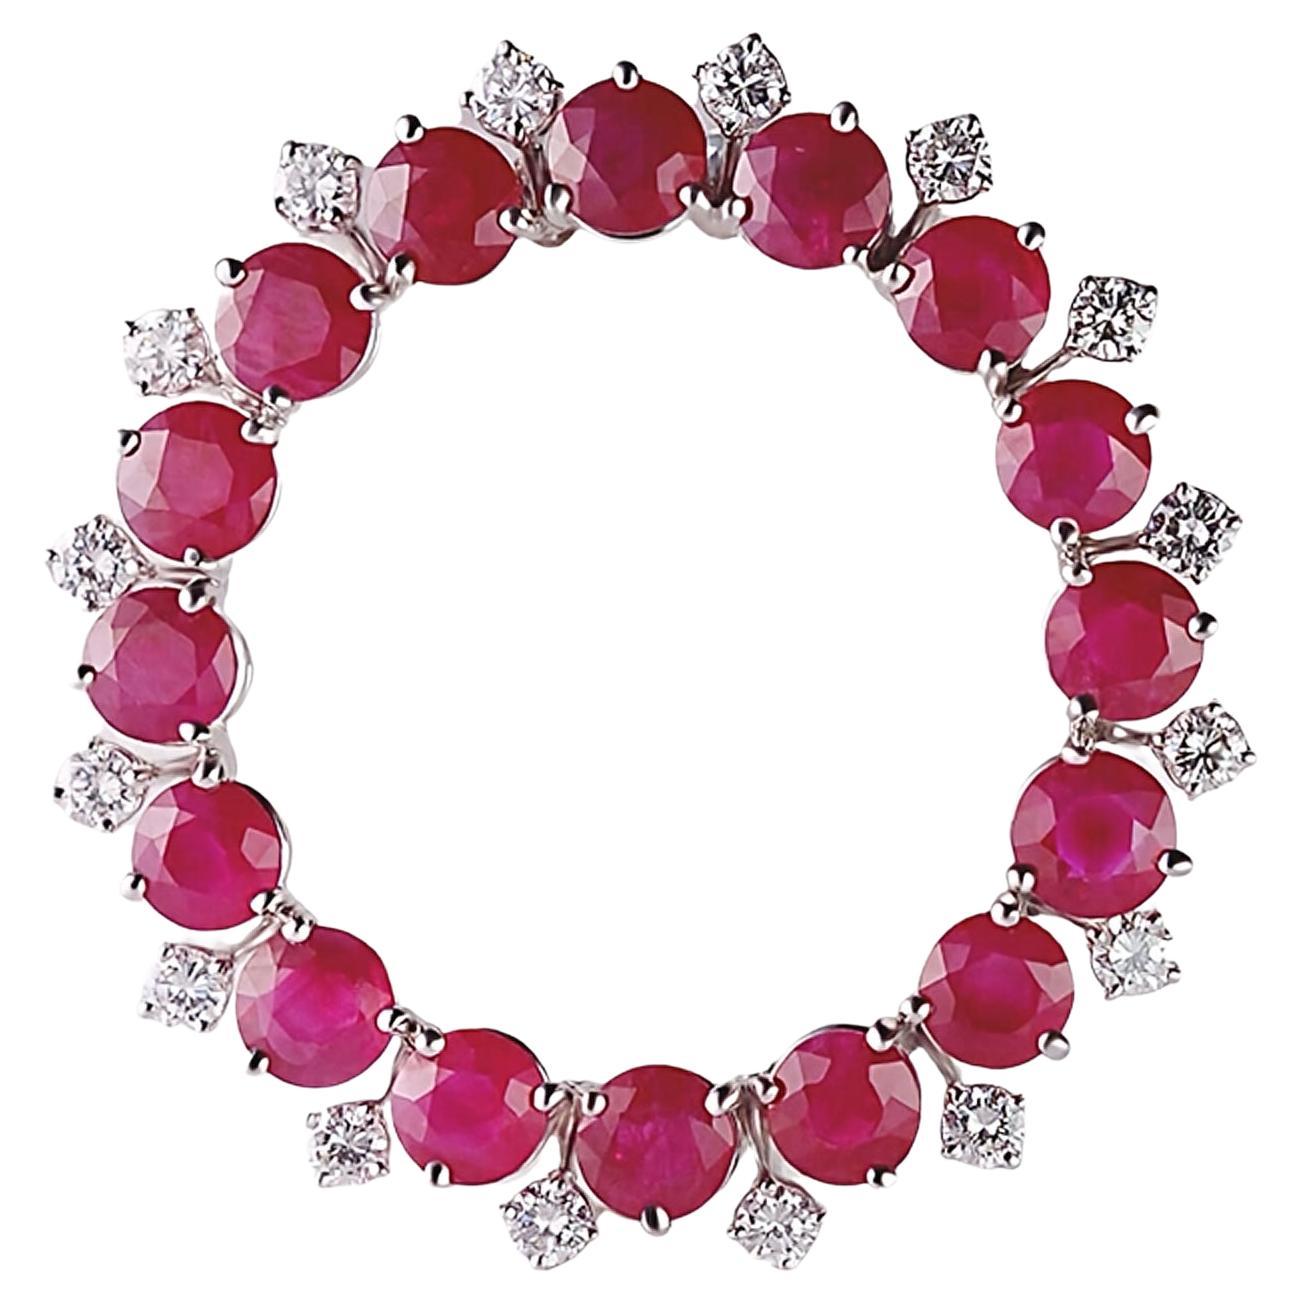 Timeless Treasure:18kt White Gold Brooch with 12 ct Burmese Rubies and Diamonds